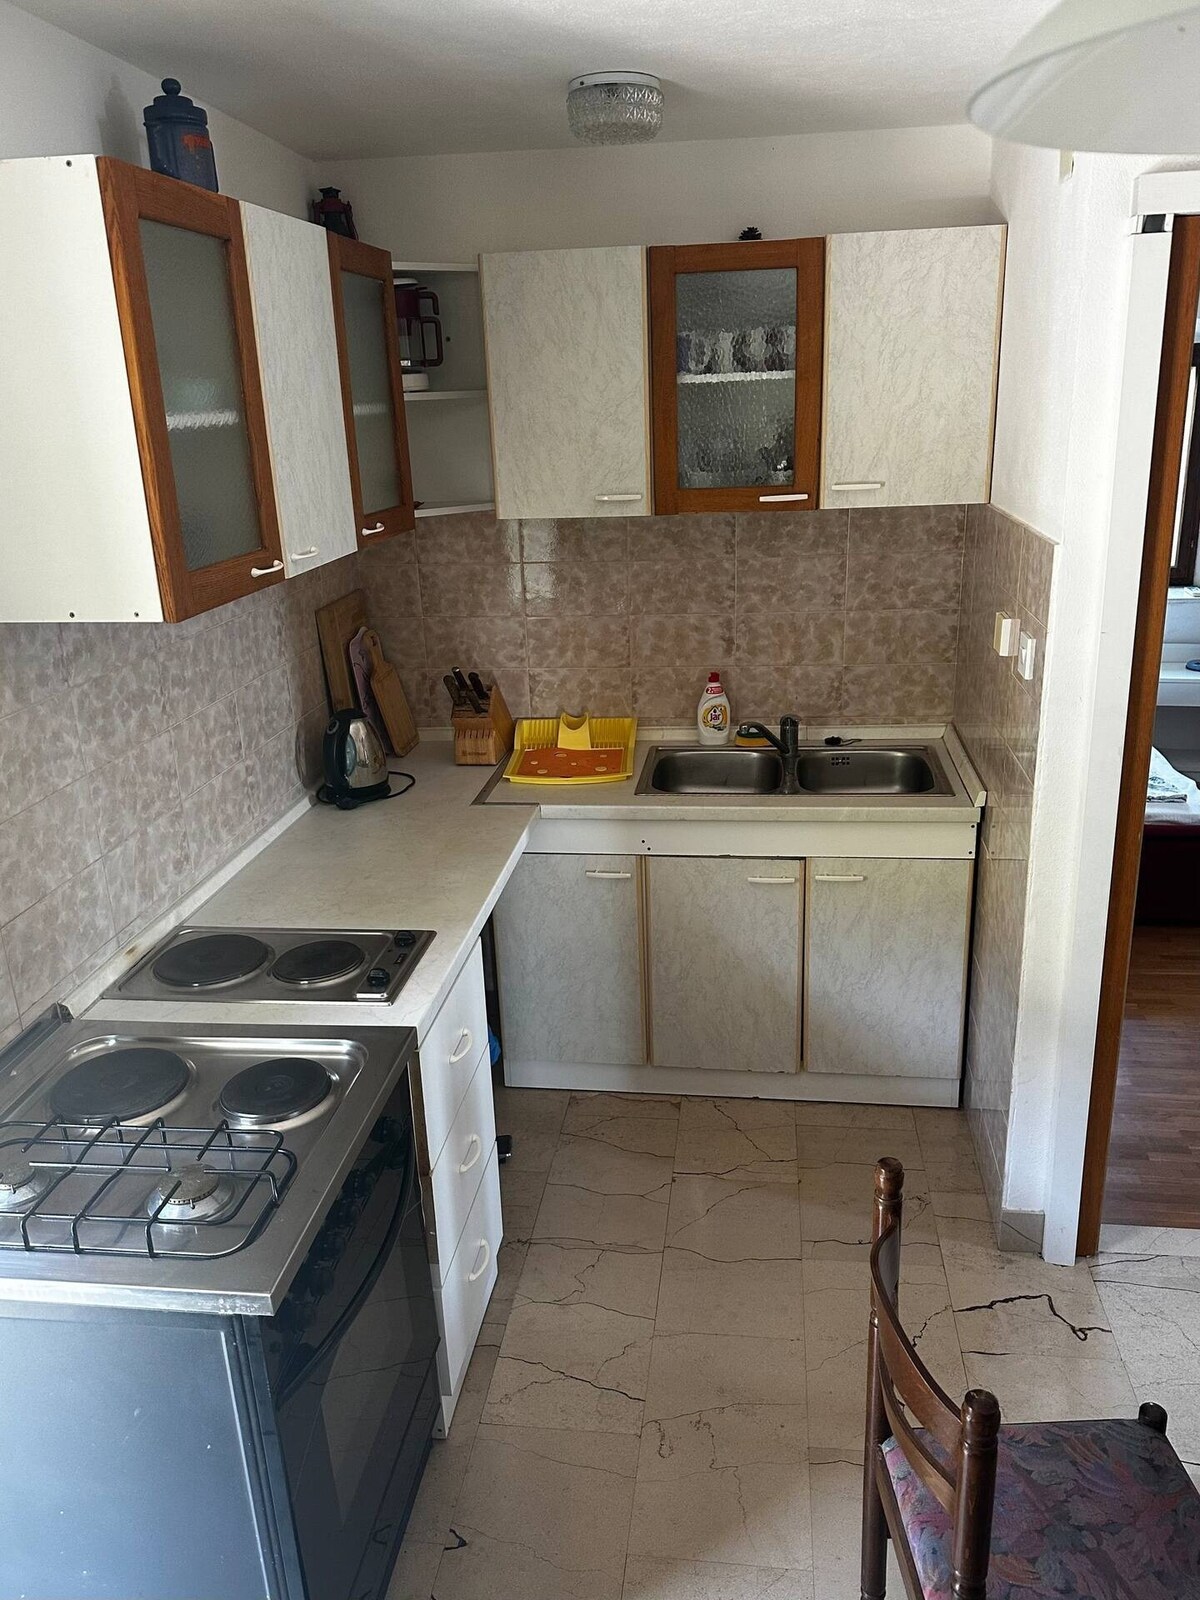 A-22780-a Three bedroom apartment with terrace and